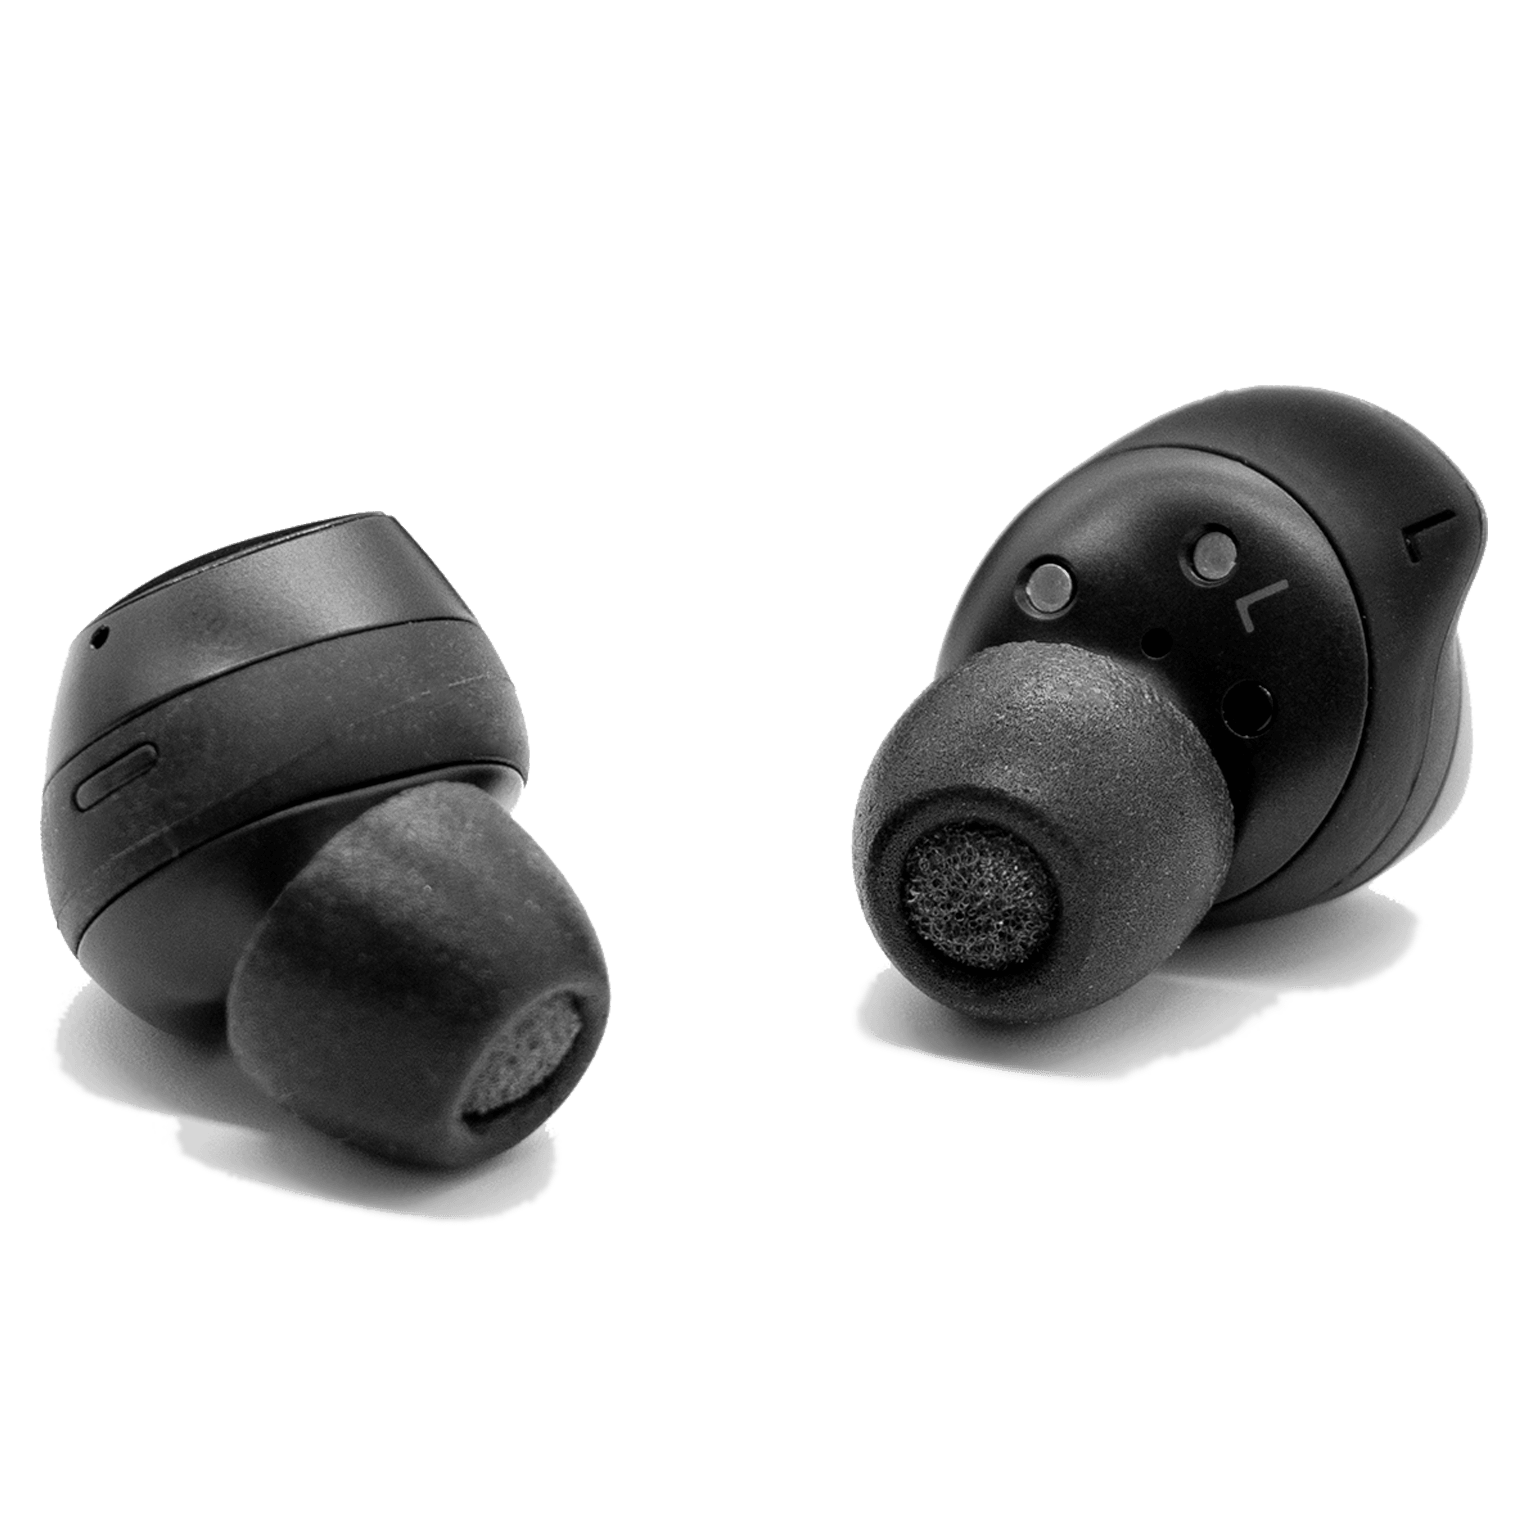 Samsung's Galaxy Buds 2 Pro are 23 percent off right now